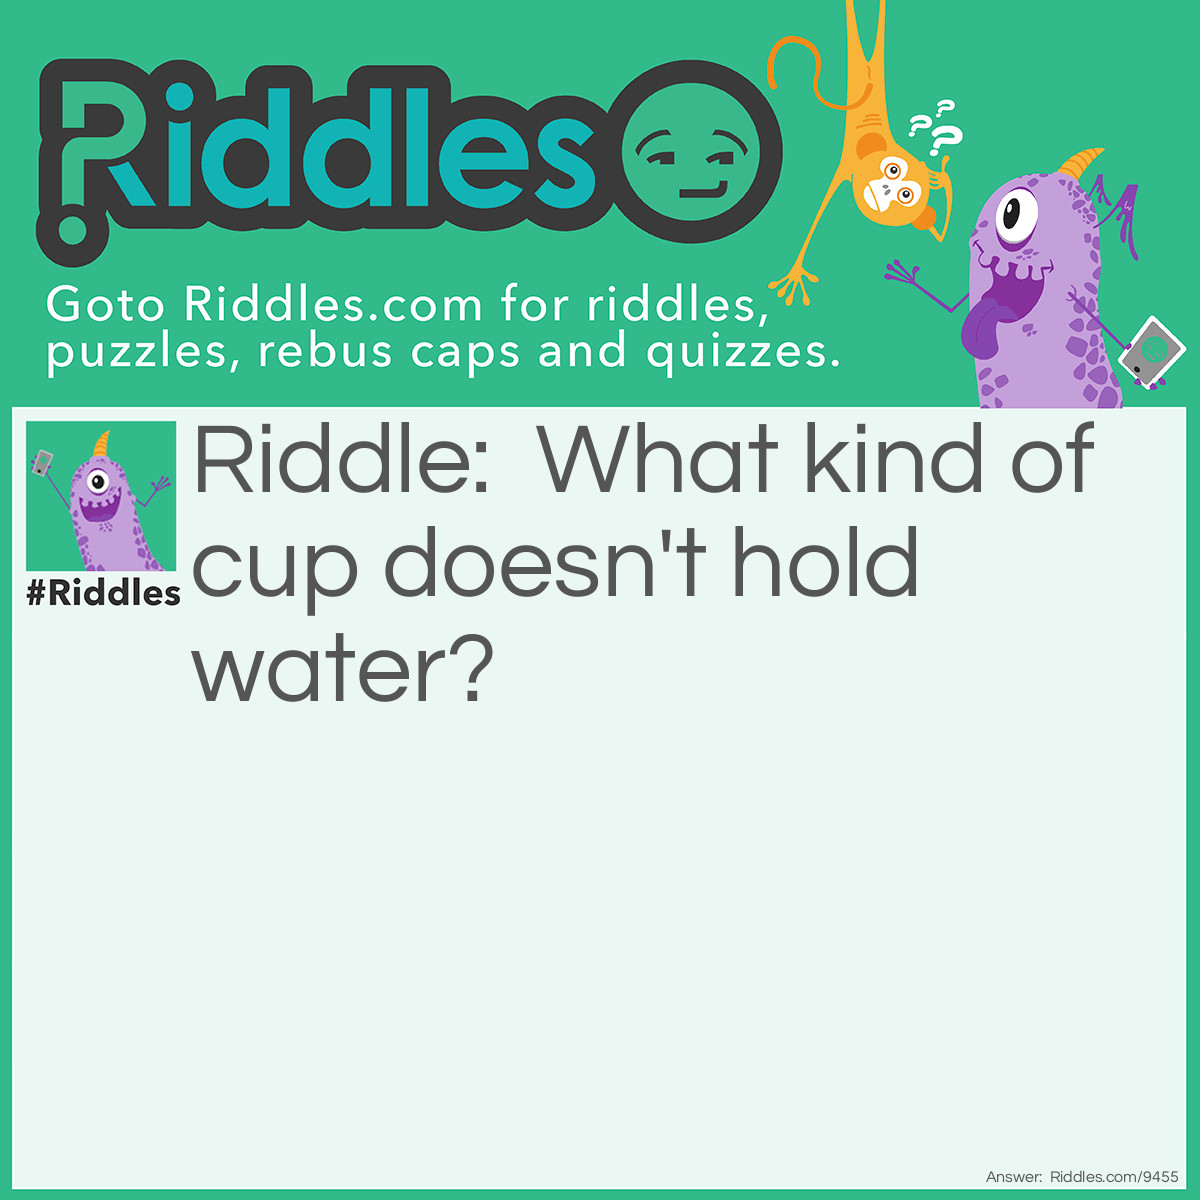 Riddle: What kind of cup doesn't hold water? Answer: A cupcake.